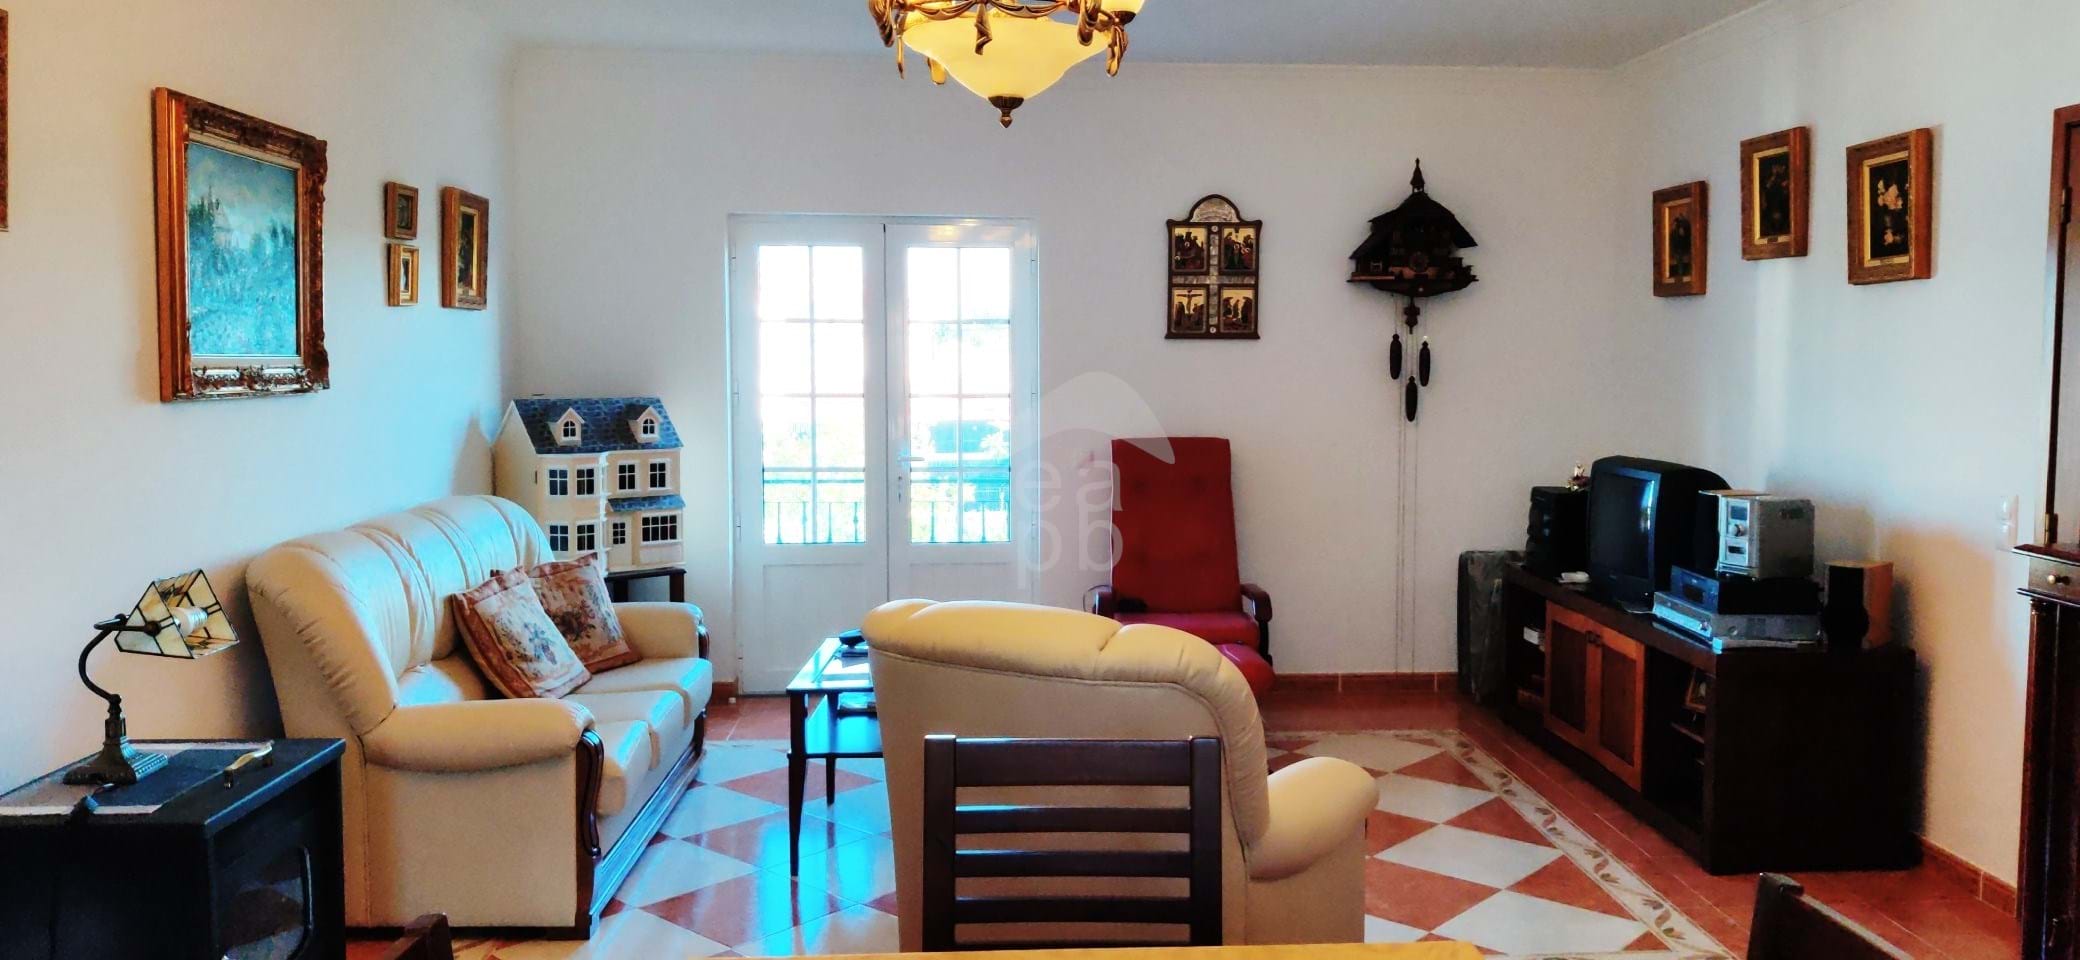 Spacious T3+ Villa with an annexe and a large garden near to Tavira!